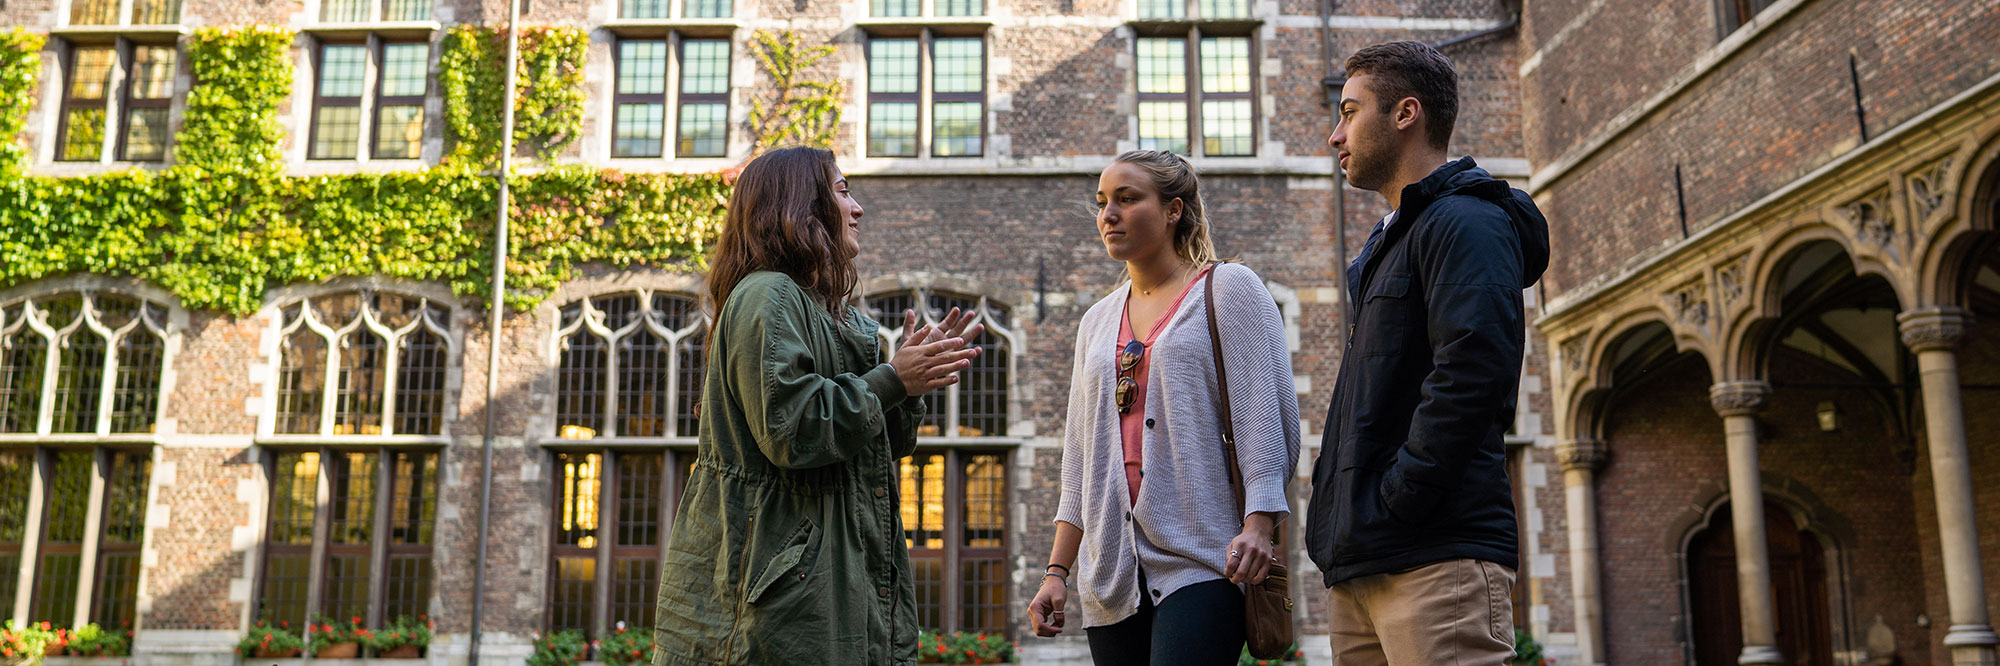 Three study abroad students talk in a courtyard in Antwerp, Belgium.